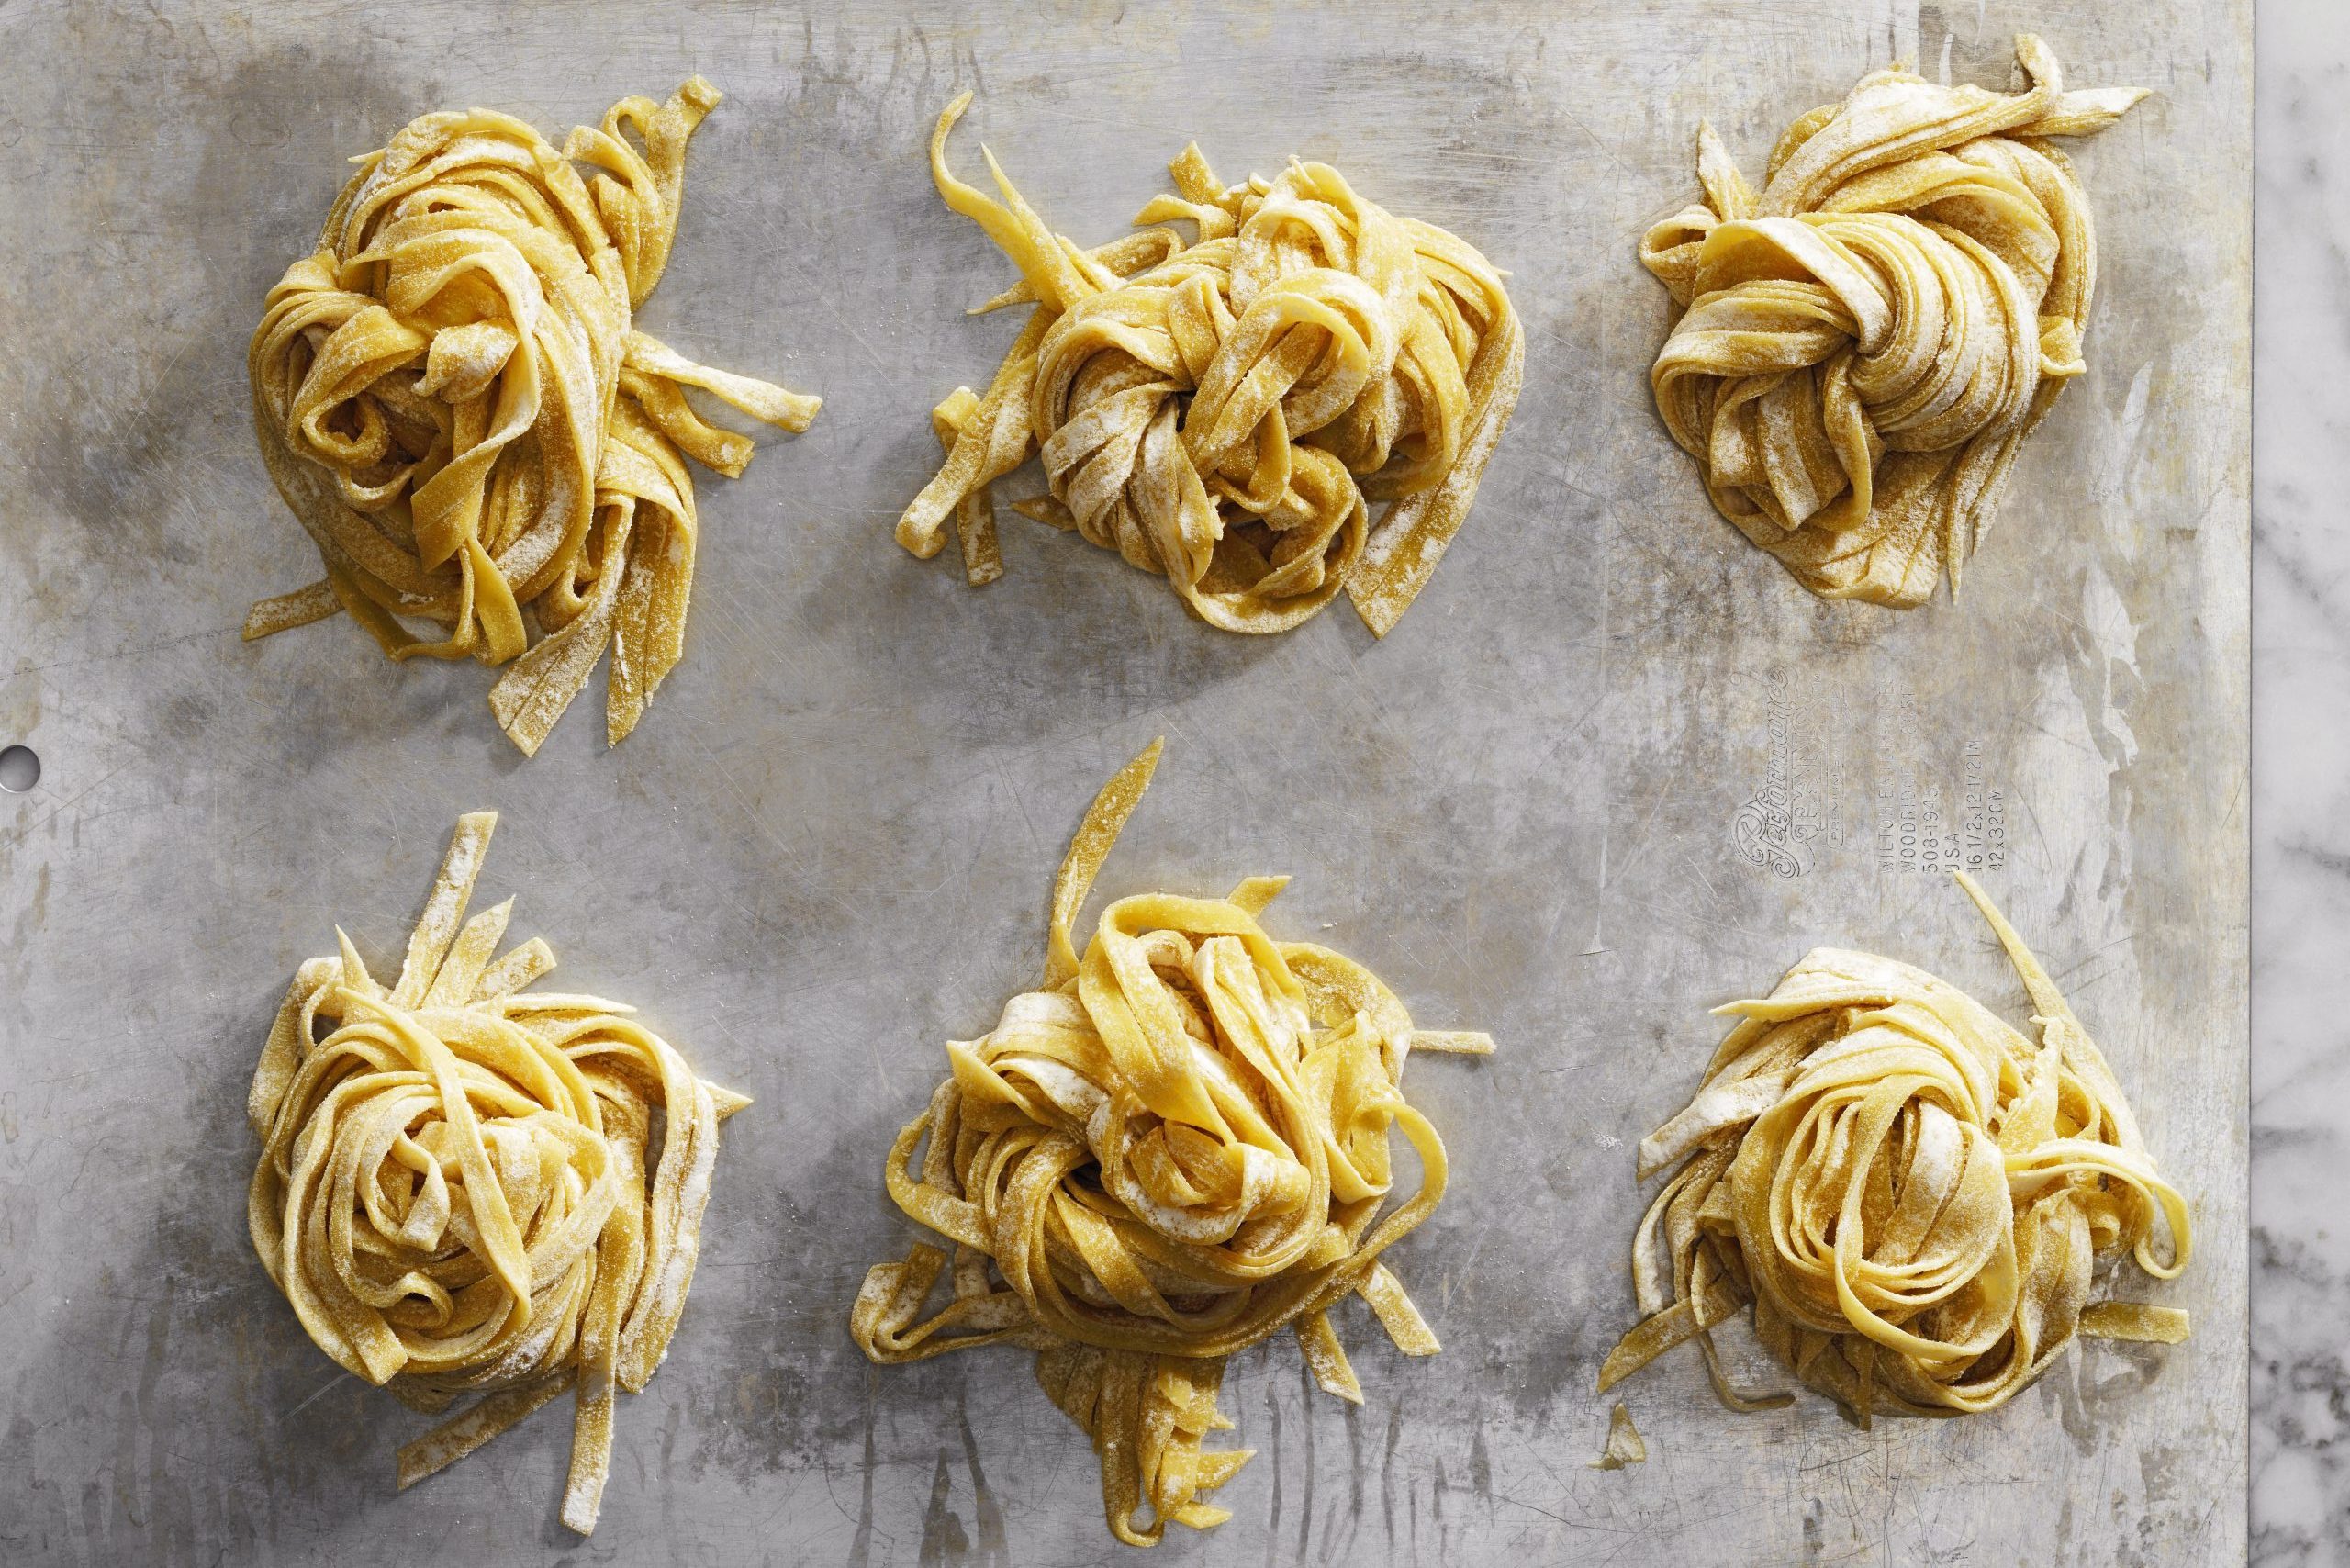 How To Make Fresh Pasta At Home: Easy Recipes & Lessons To Make